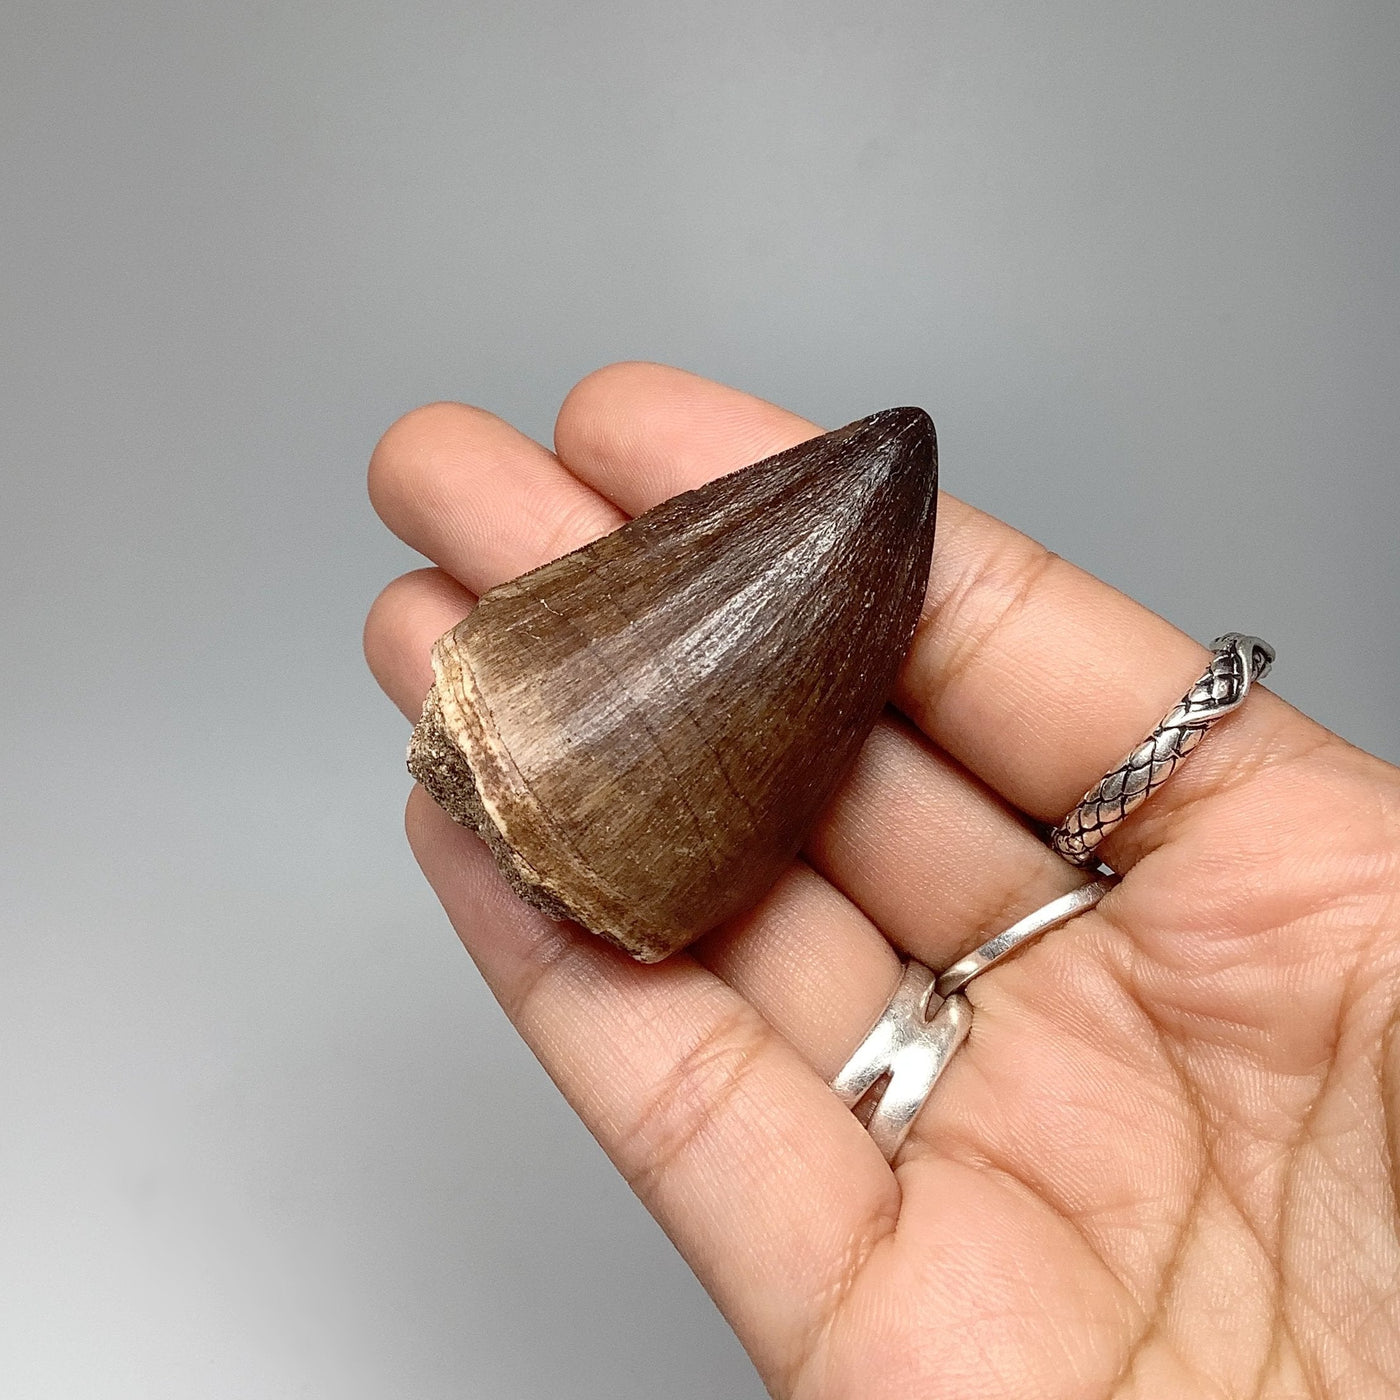 Fossilized Mosasaur Tooth Specimen